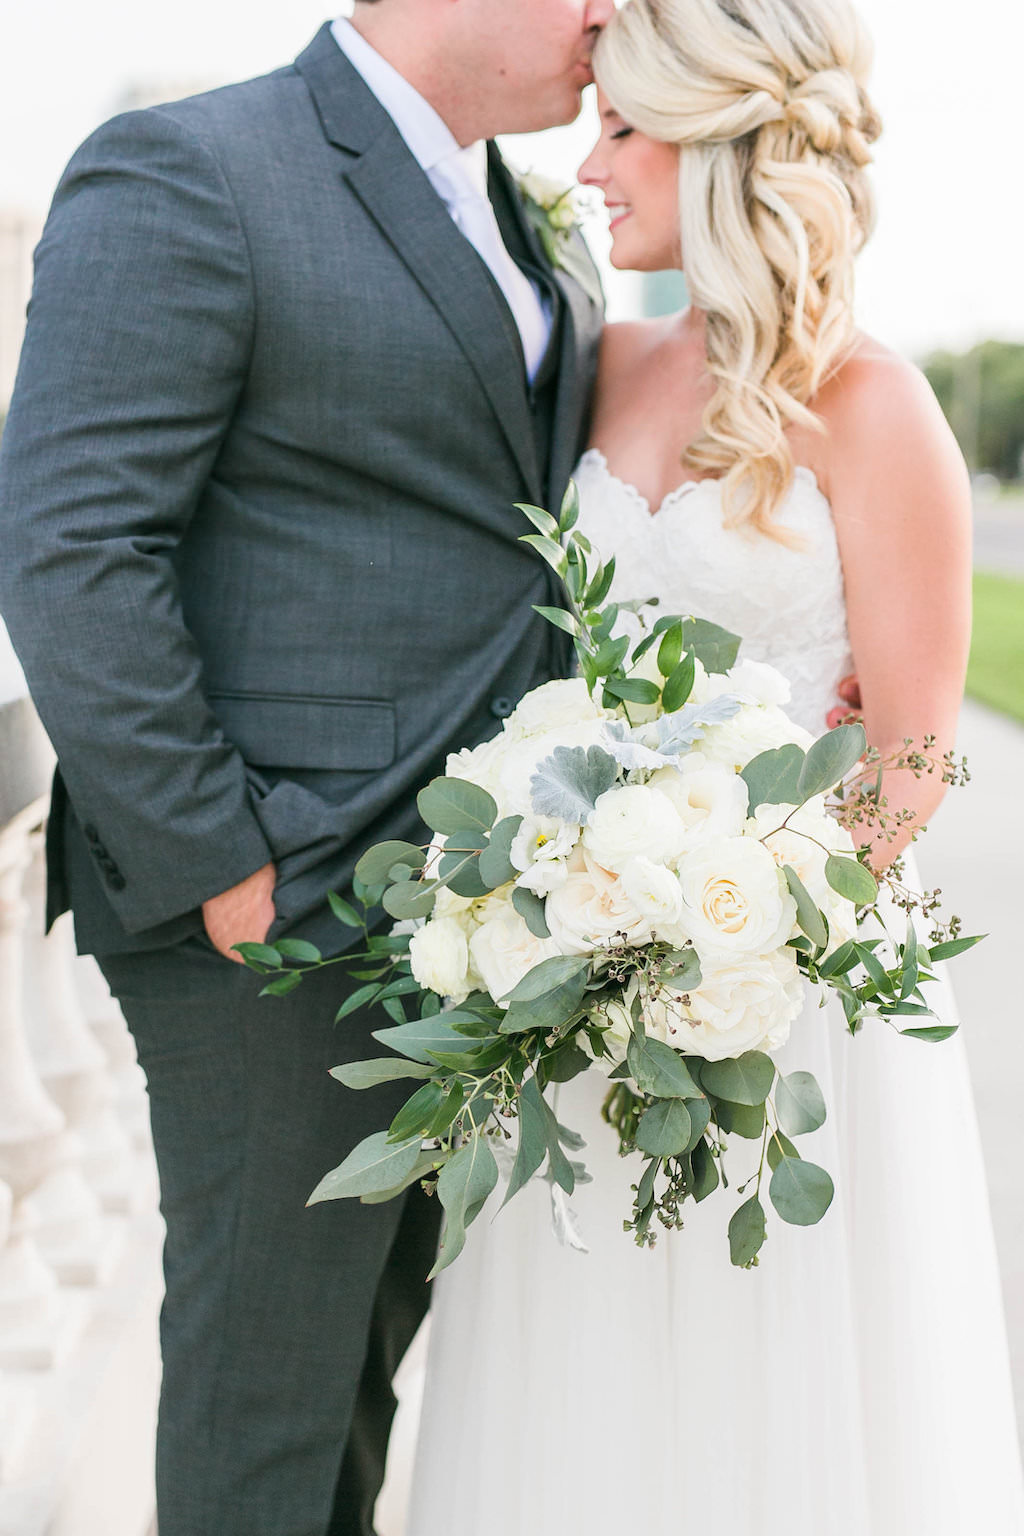 Bride and Groom Outdoor Wedding Portrait, Bride in Strapless Sweetheart A-Line Lace Wedding Dress with White and Greenery Floral Bouquet, Groom in Grey Tuxedo | Tampa Bay Hair and Makeup Femme Akoi